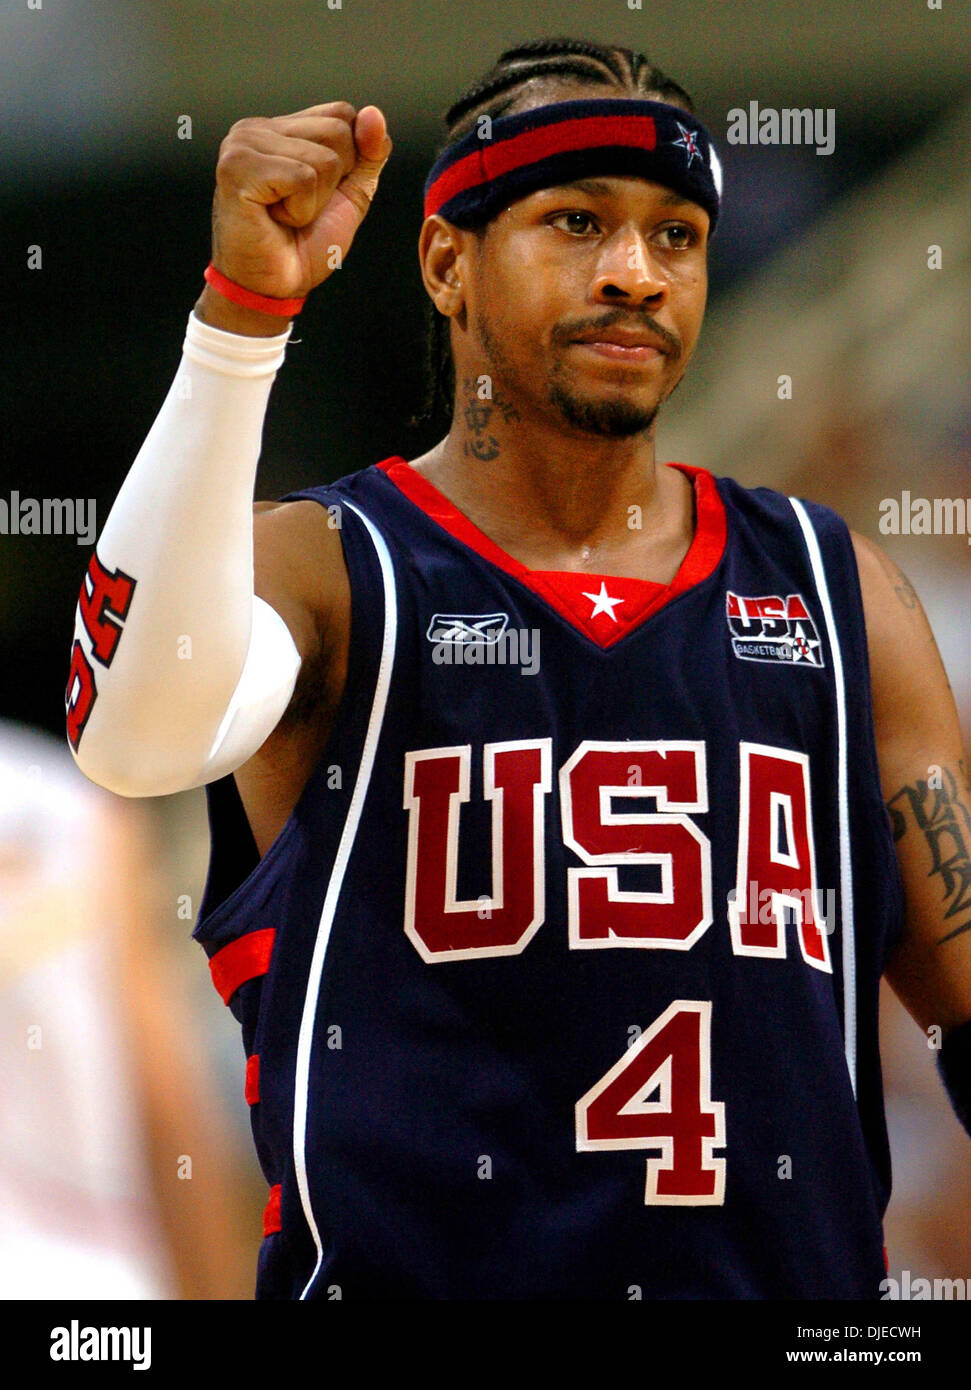 Aug 26, 2004; Athens,  GREECE; U.S. Olympic basketball team player ALLEN IVERSON reacts Thursday Aug. 26, 2004 in Athens, Greece as it becomes obvious the U.S. will win their game over Spain to advance to the Olympic semifinals during the XXVIII Olympiad. The U.S. won 102-94. Stock Photo